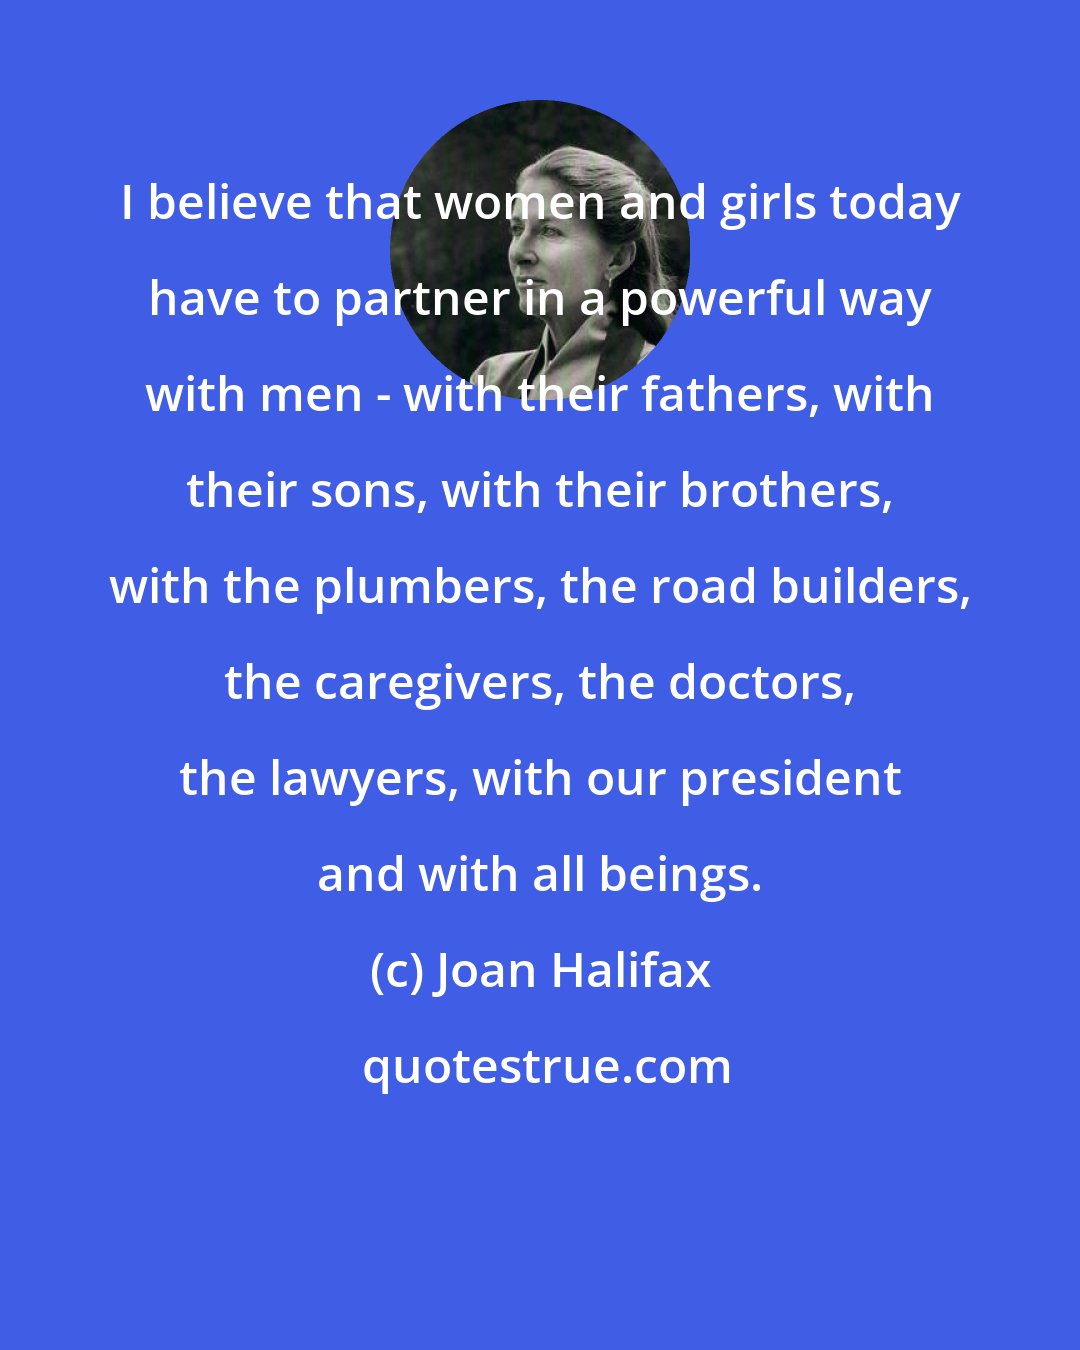 Joan Halifax: I believe that women and girls today have to partner in a powerful way with men - with their fathers, with their sons, with their brothers, with the plumbers, the road builders, the caregivers, the doctors, the lawyers, with our president and with all beings.